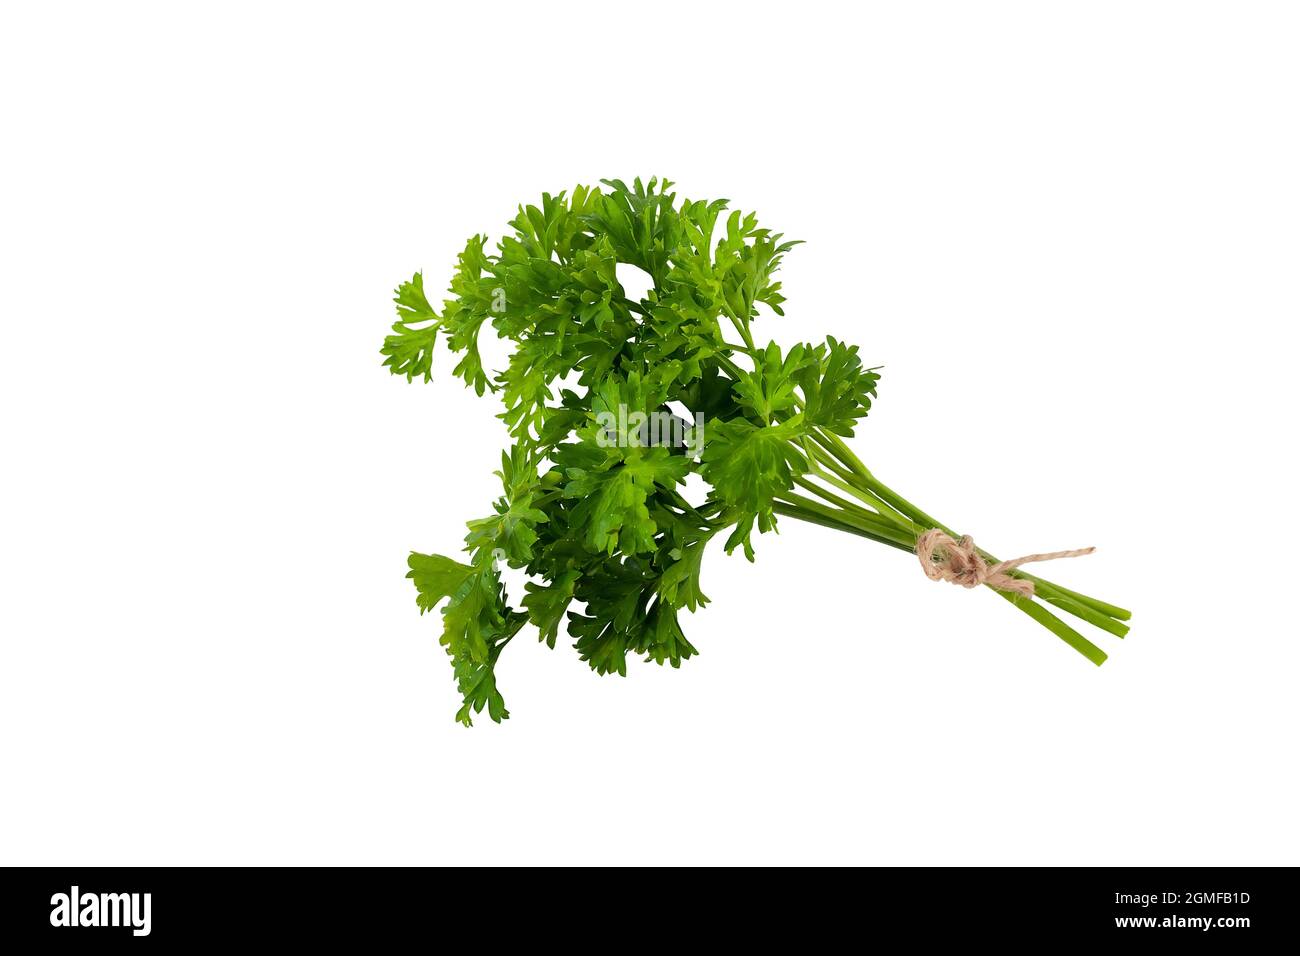 parsley bunch tied with cord isolated on white background Stock Photo